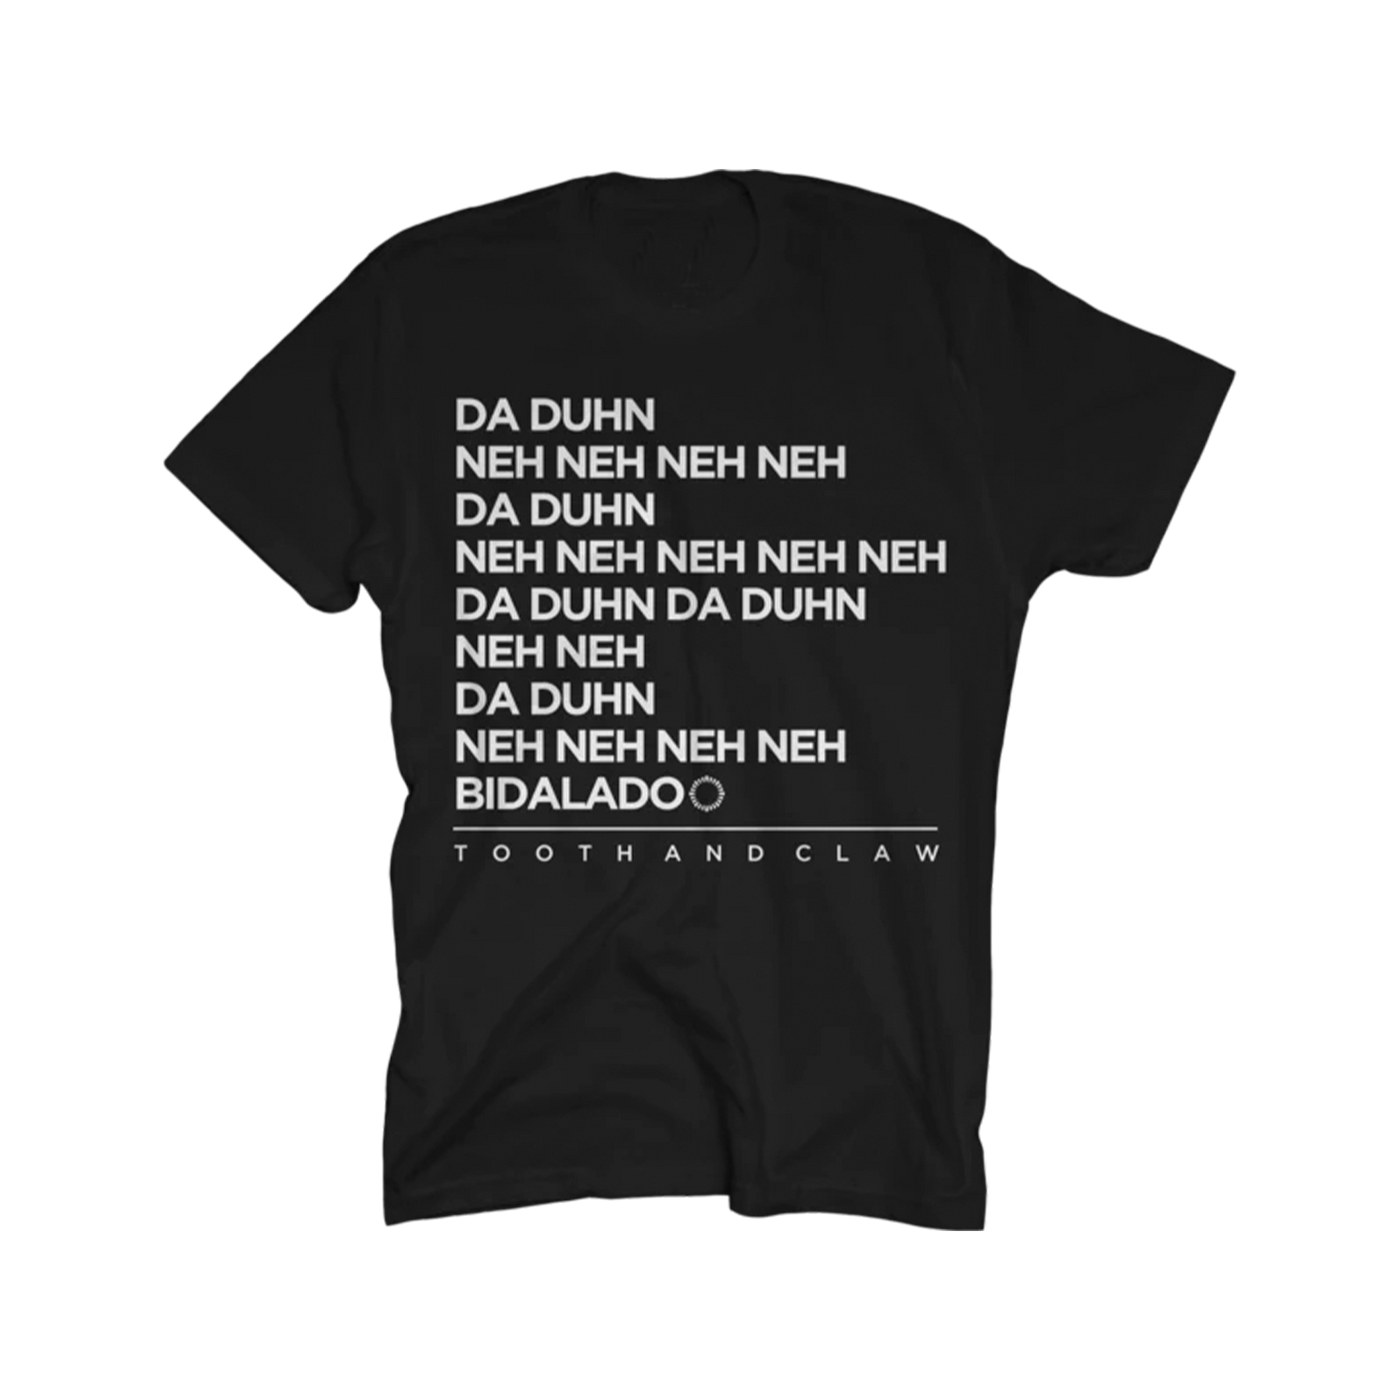 Tooth and Claw Lyric T-Shirt